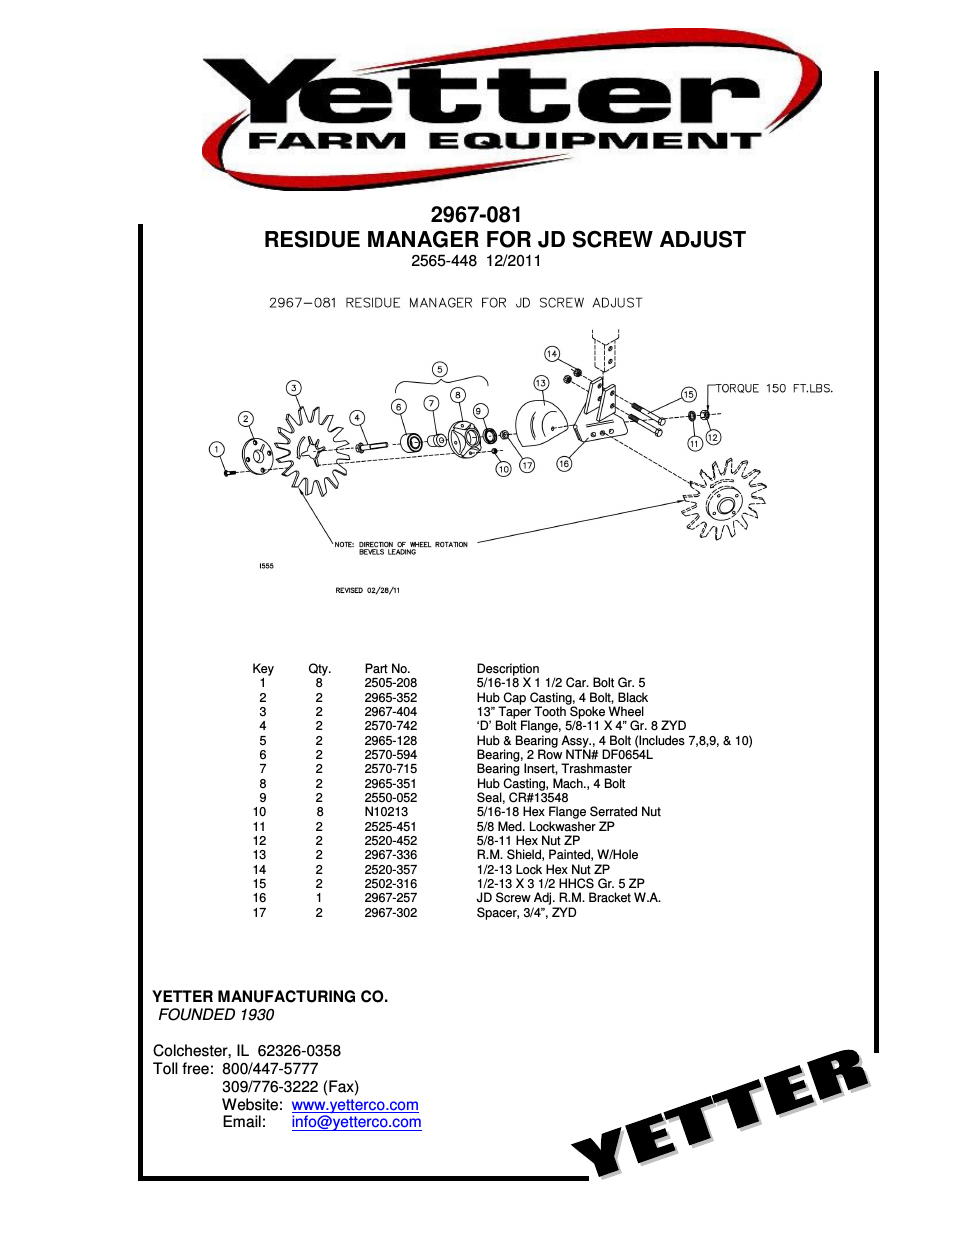 2967-081 Residue Manager for JD Screw Adjust